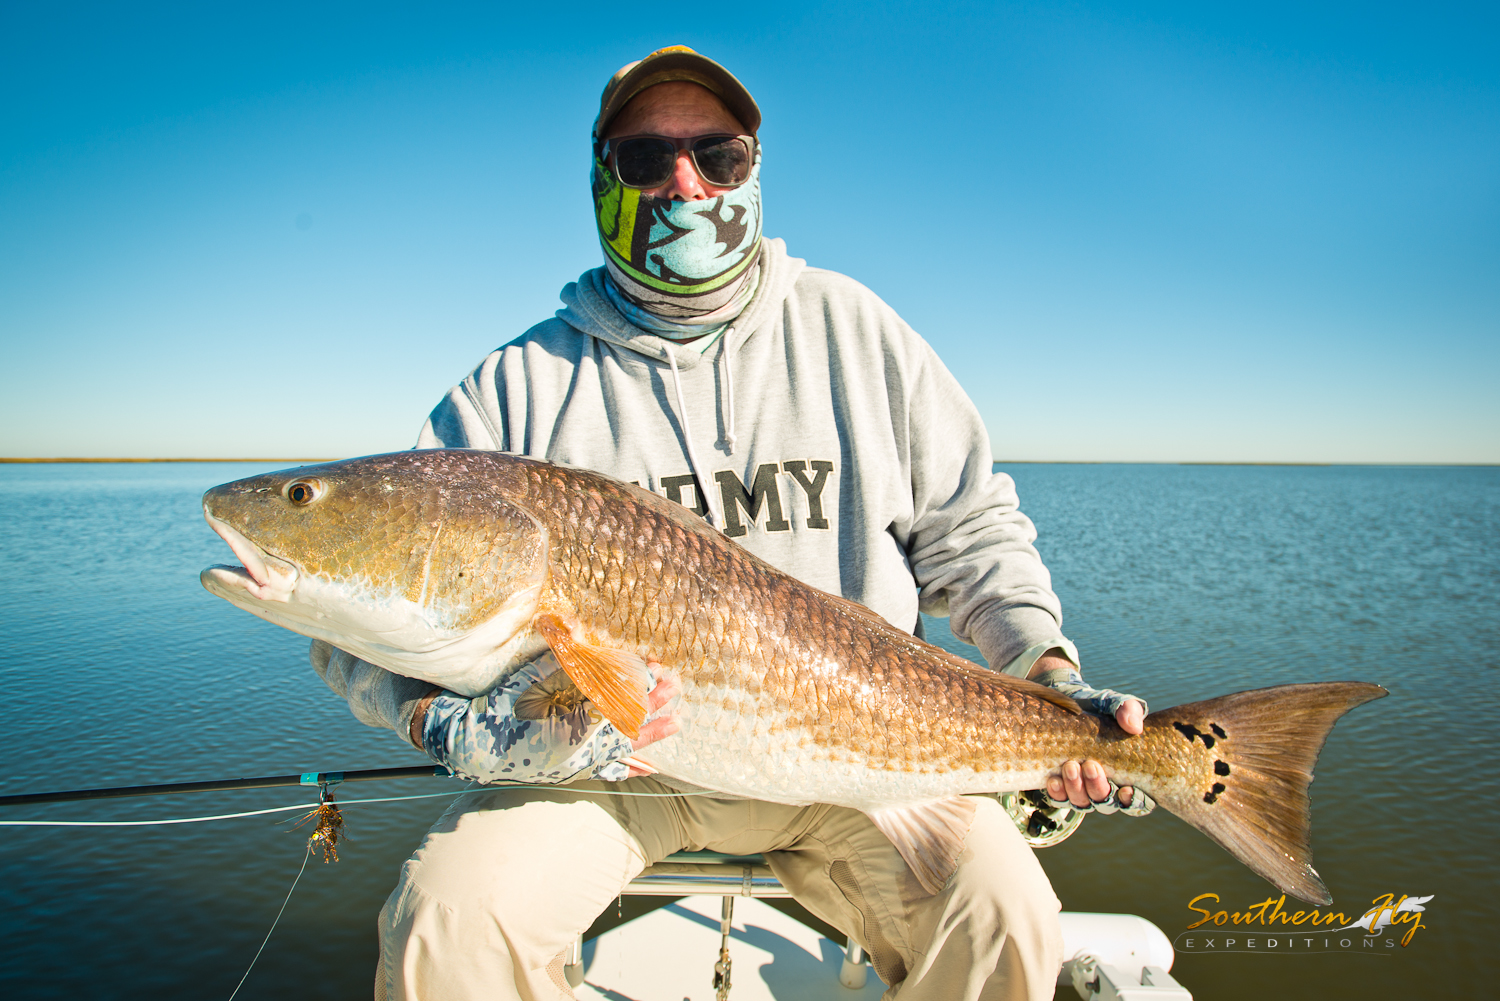 things to do while in New Orleans - Fishing Charters Southern Fly Expeditions 